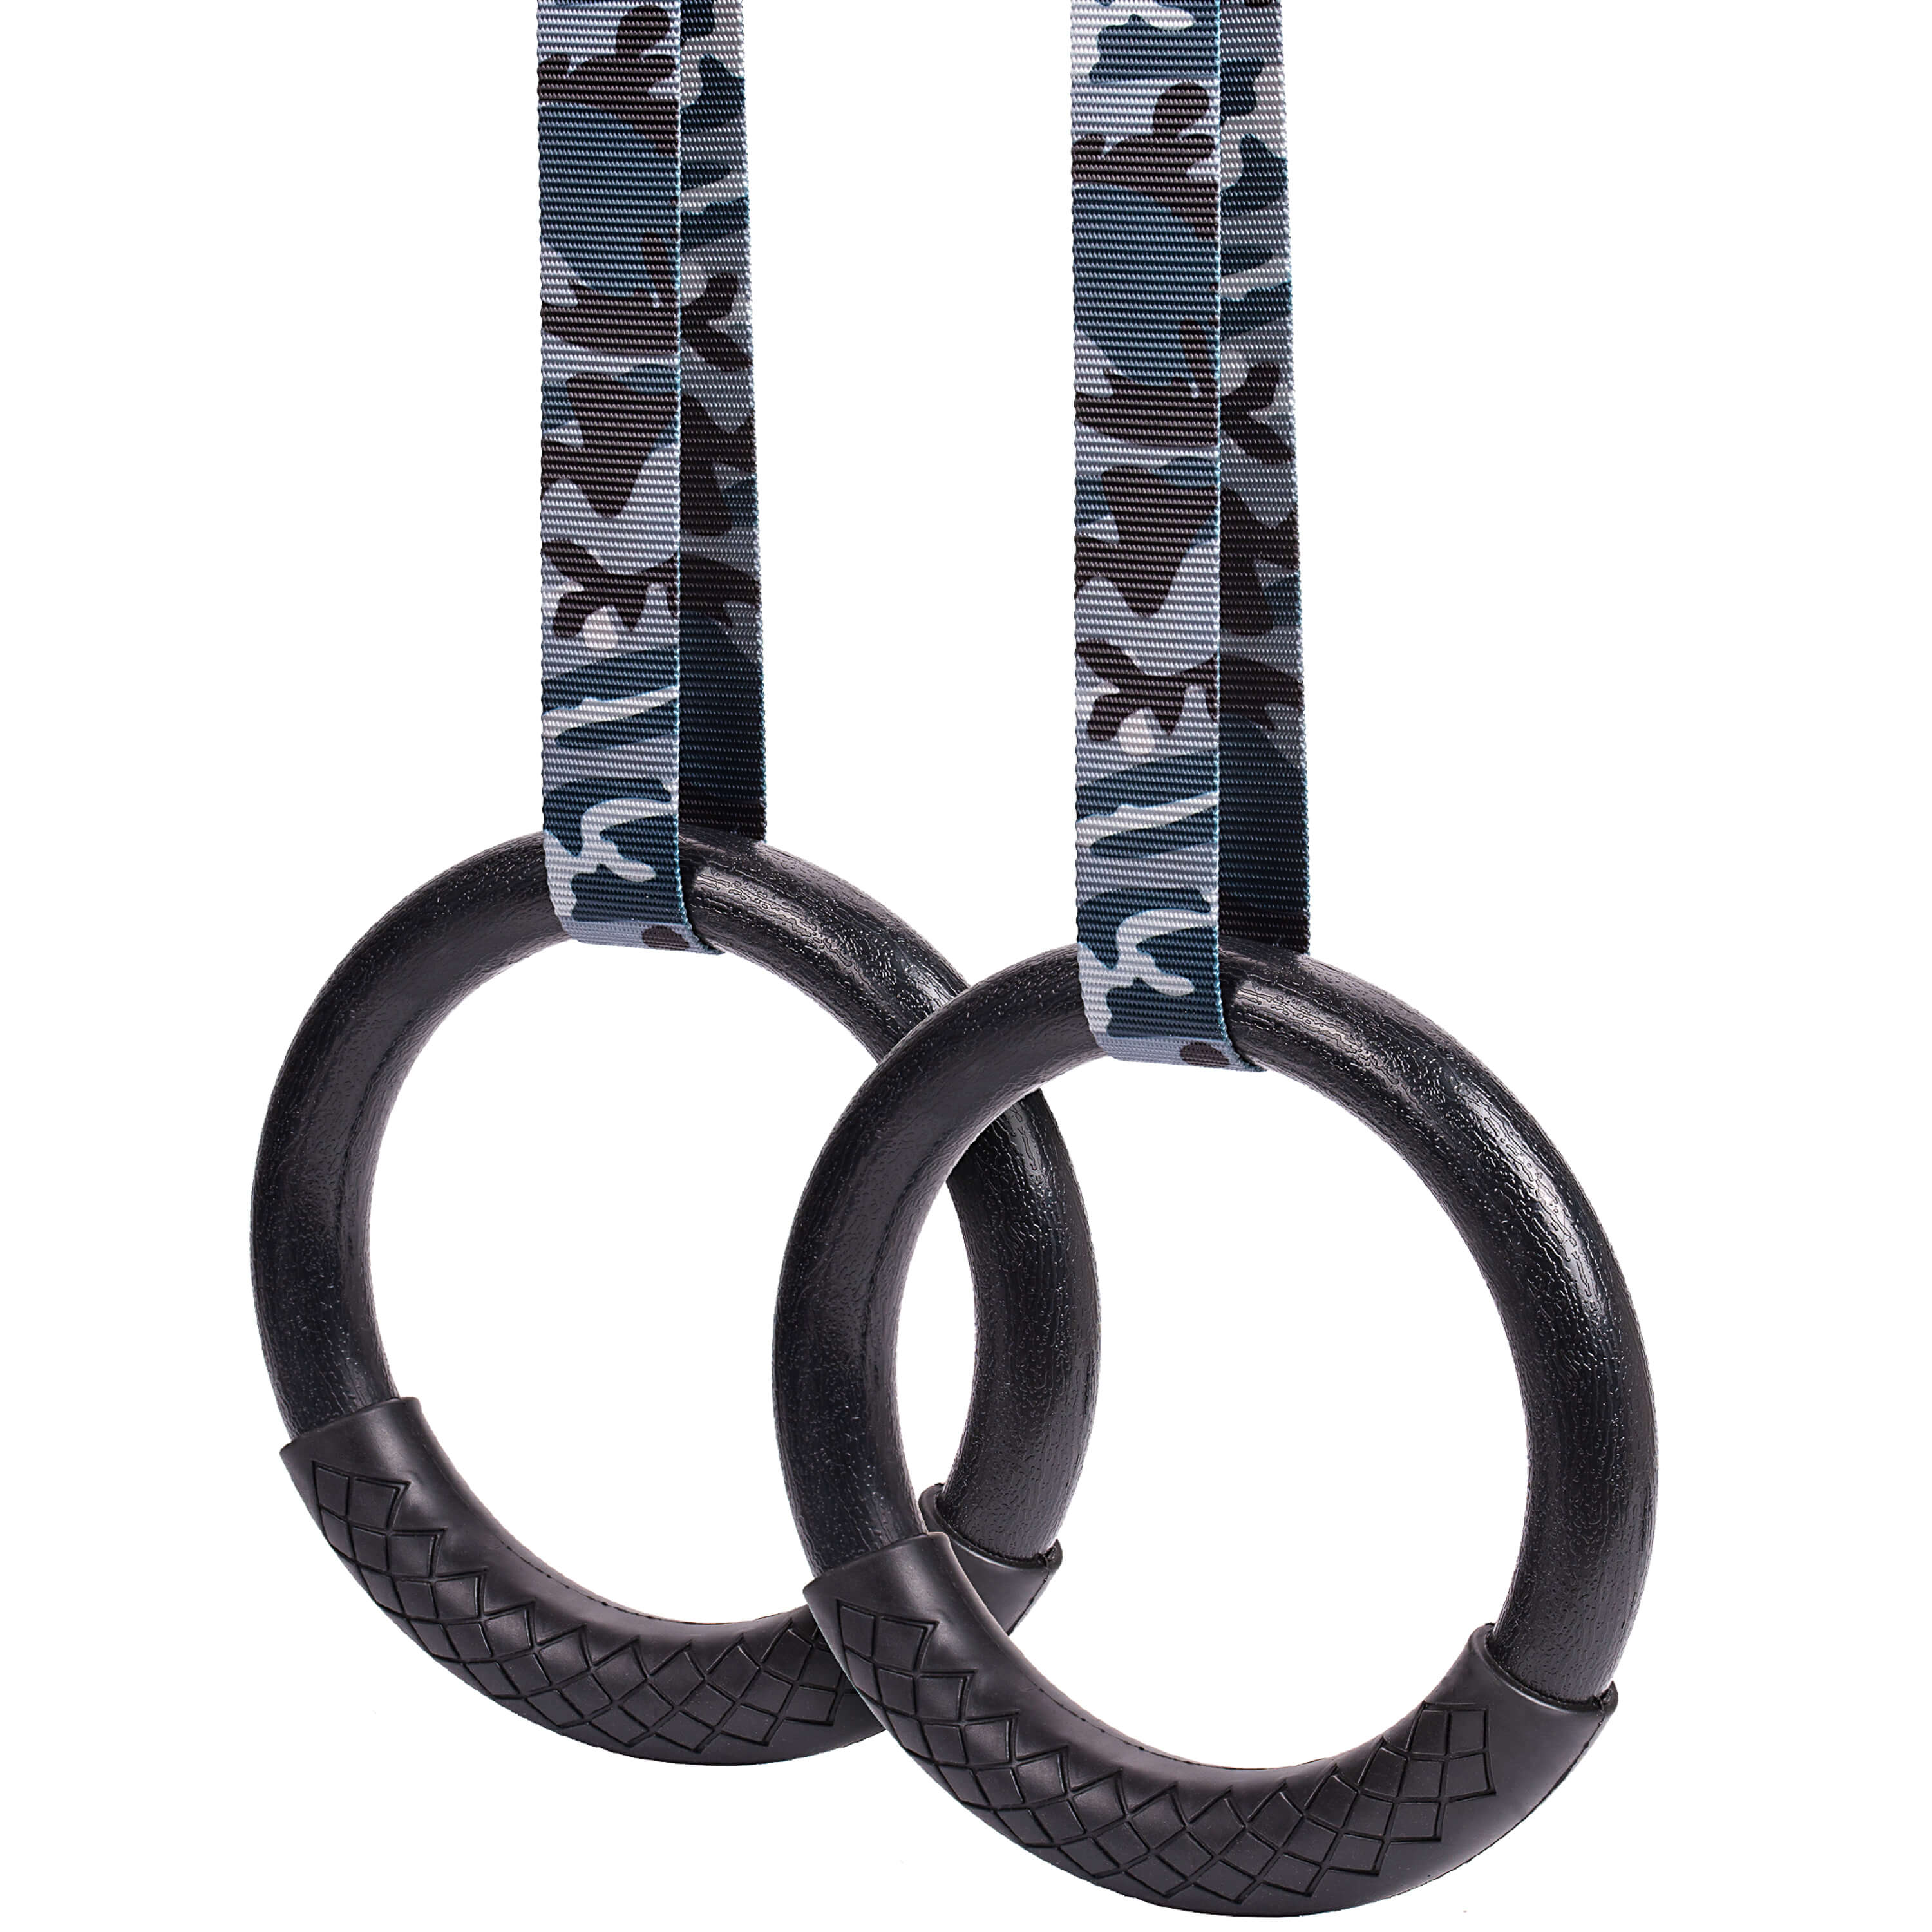 Outdoor gymnastics rings by Atomic Iron with grey camouflage straps